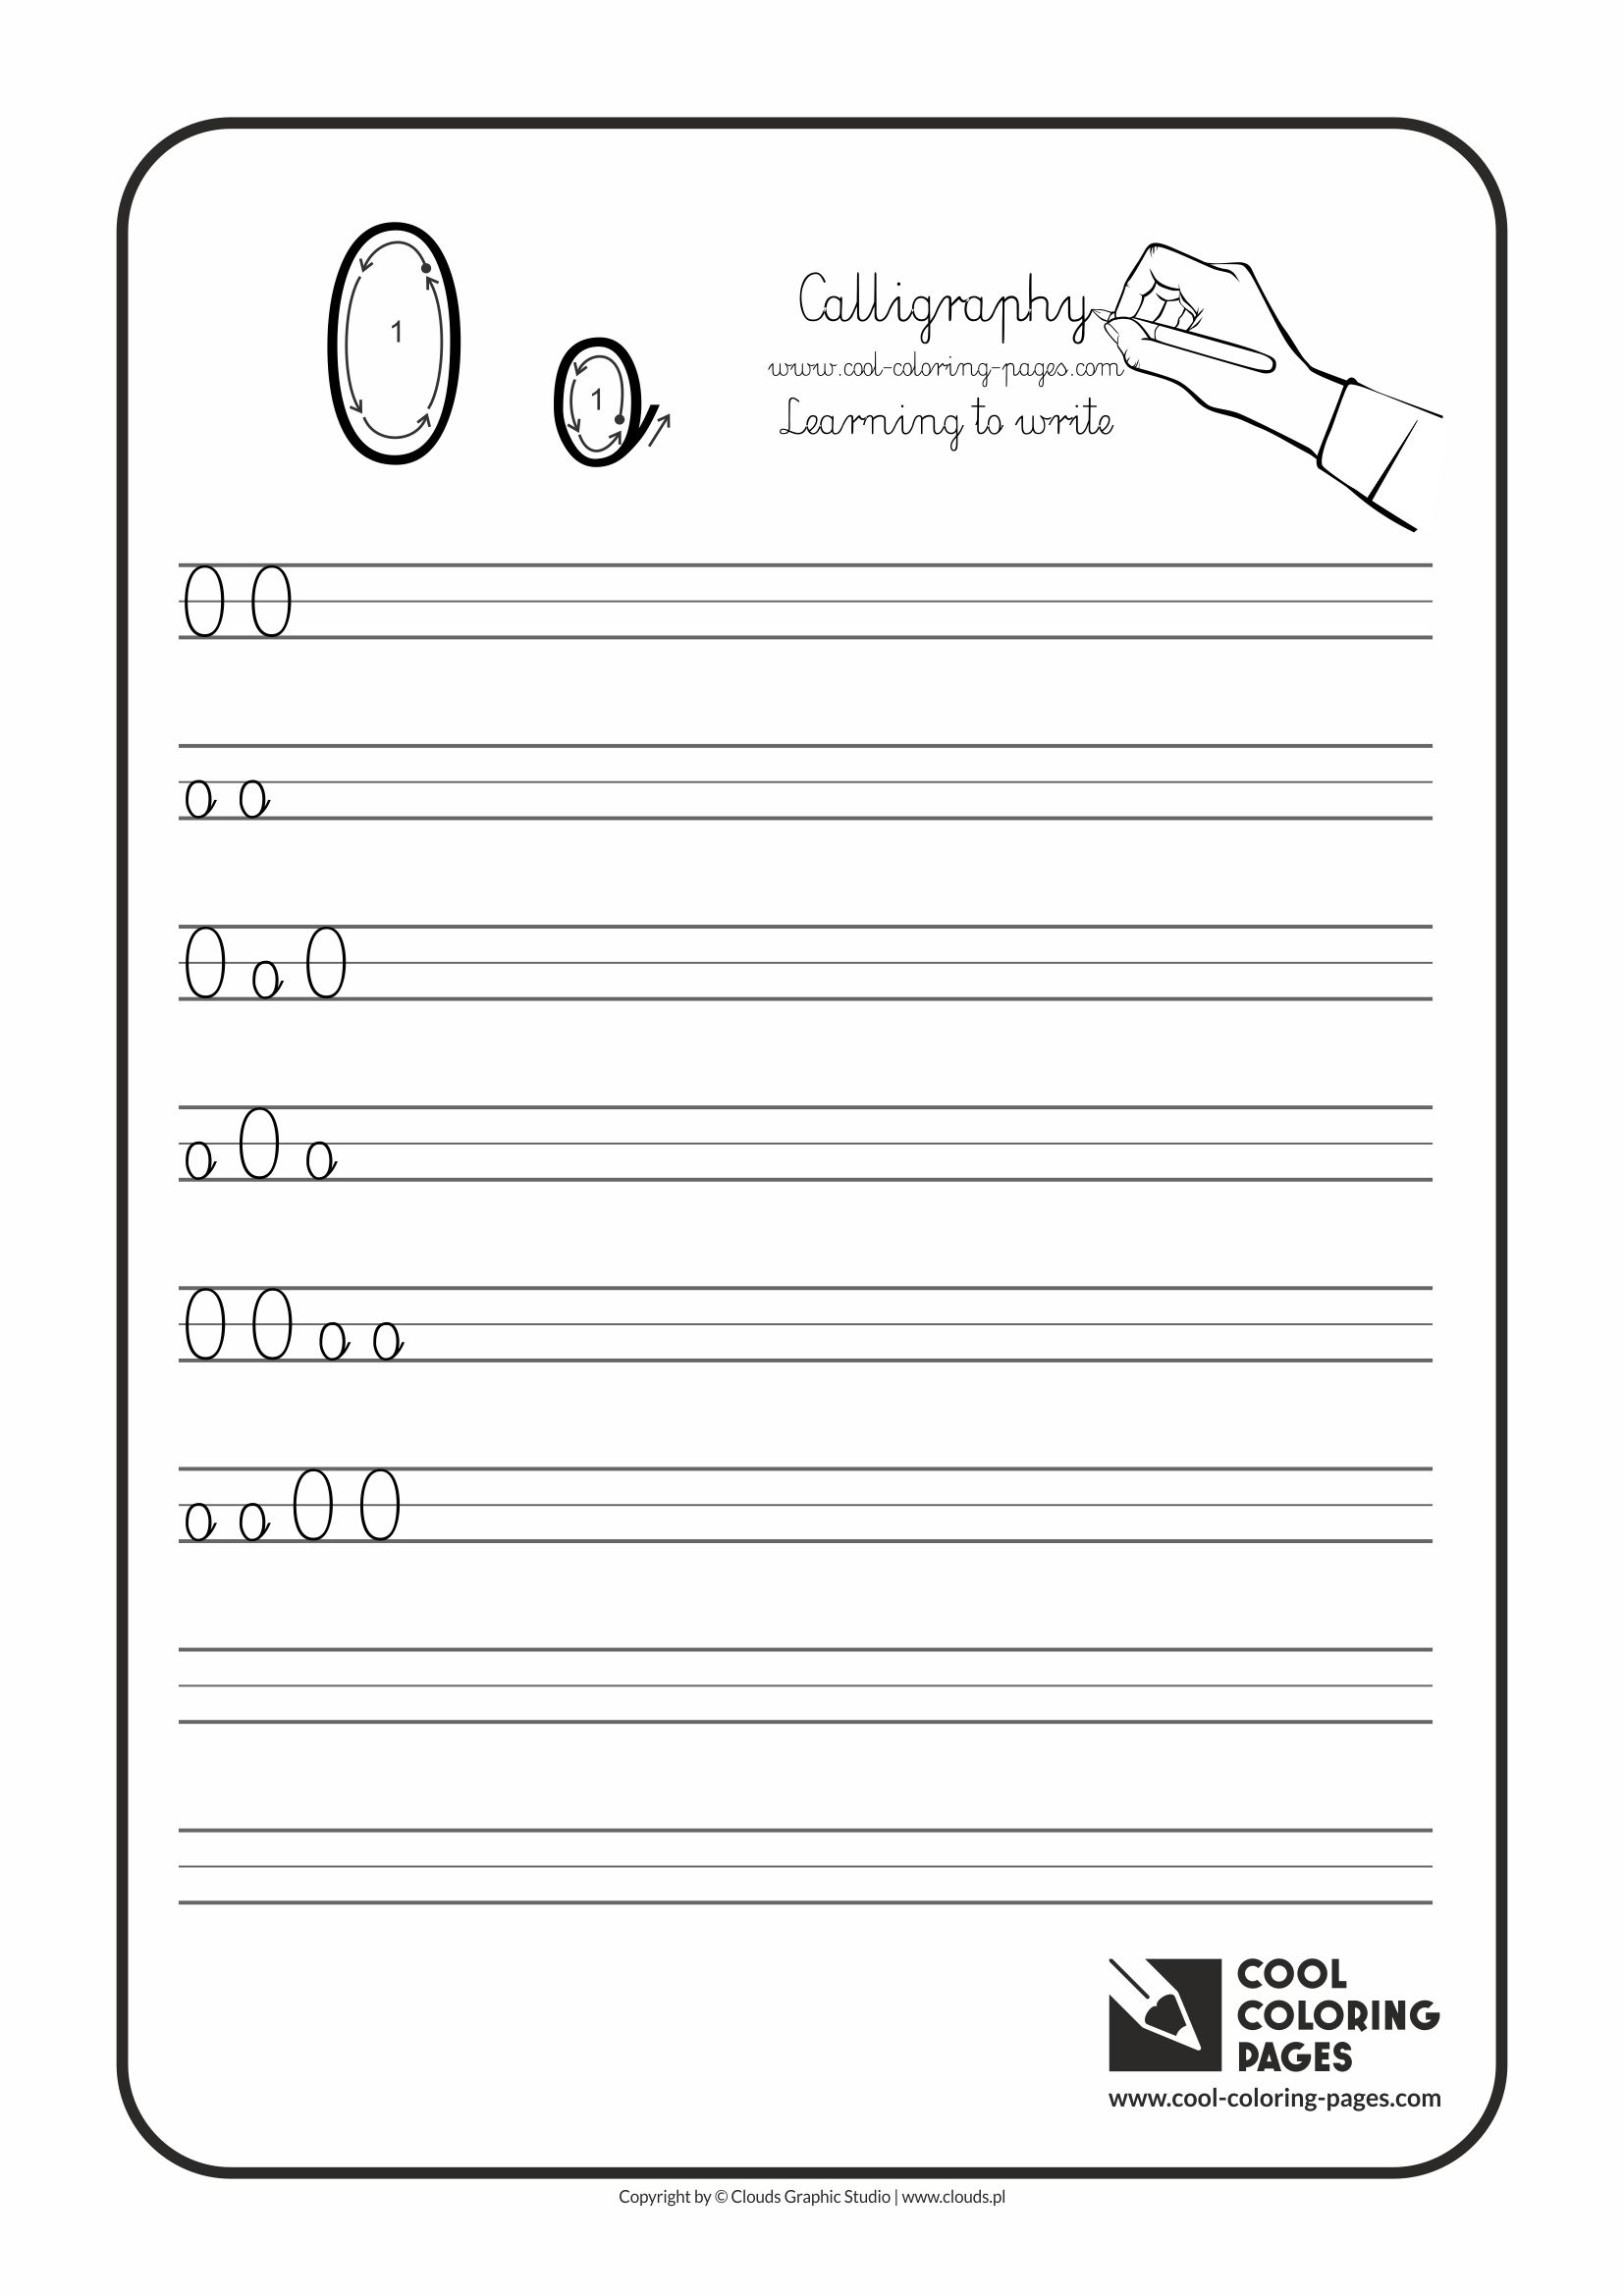 Cool Coloring Pages / Calligraphy / Letter O - Handwriting for kids / Worksheets